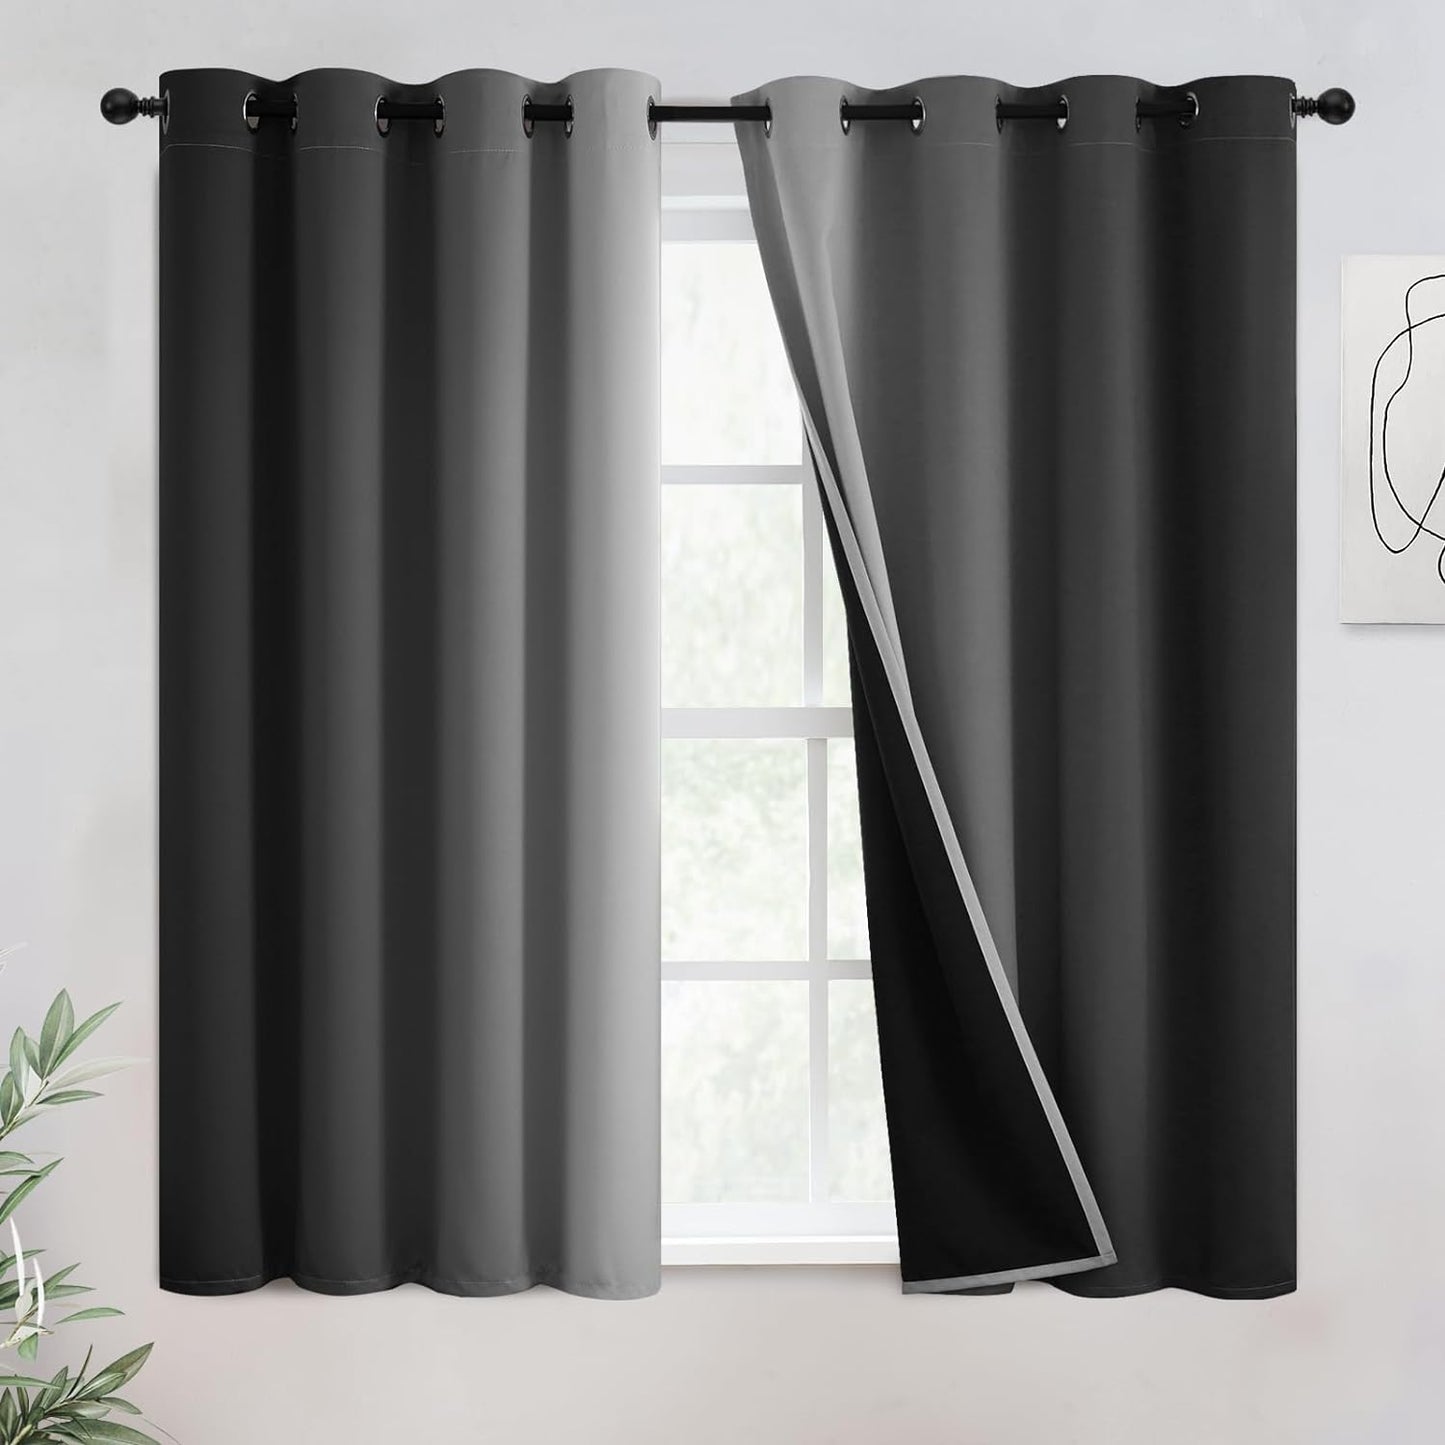 COSVIYA 100% Blackout Curtains & Drapes Ombre Purple Curtains 63 Inch Length 2 Panels,Full Room Darkening Grommet Gradient Insulated Thermal Window Curtains for Bedroom/Living Room,52X63 Inches  COSVIYA Black To Greyish White 52W X 54L 